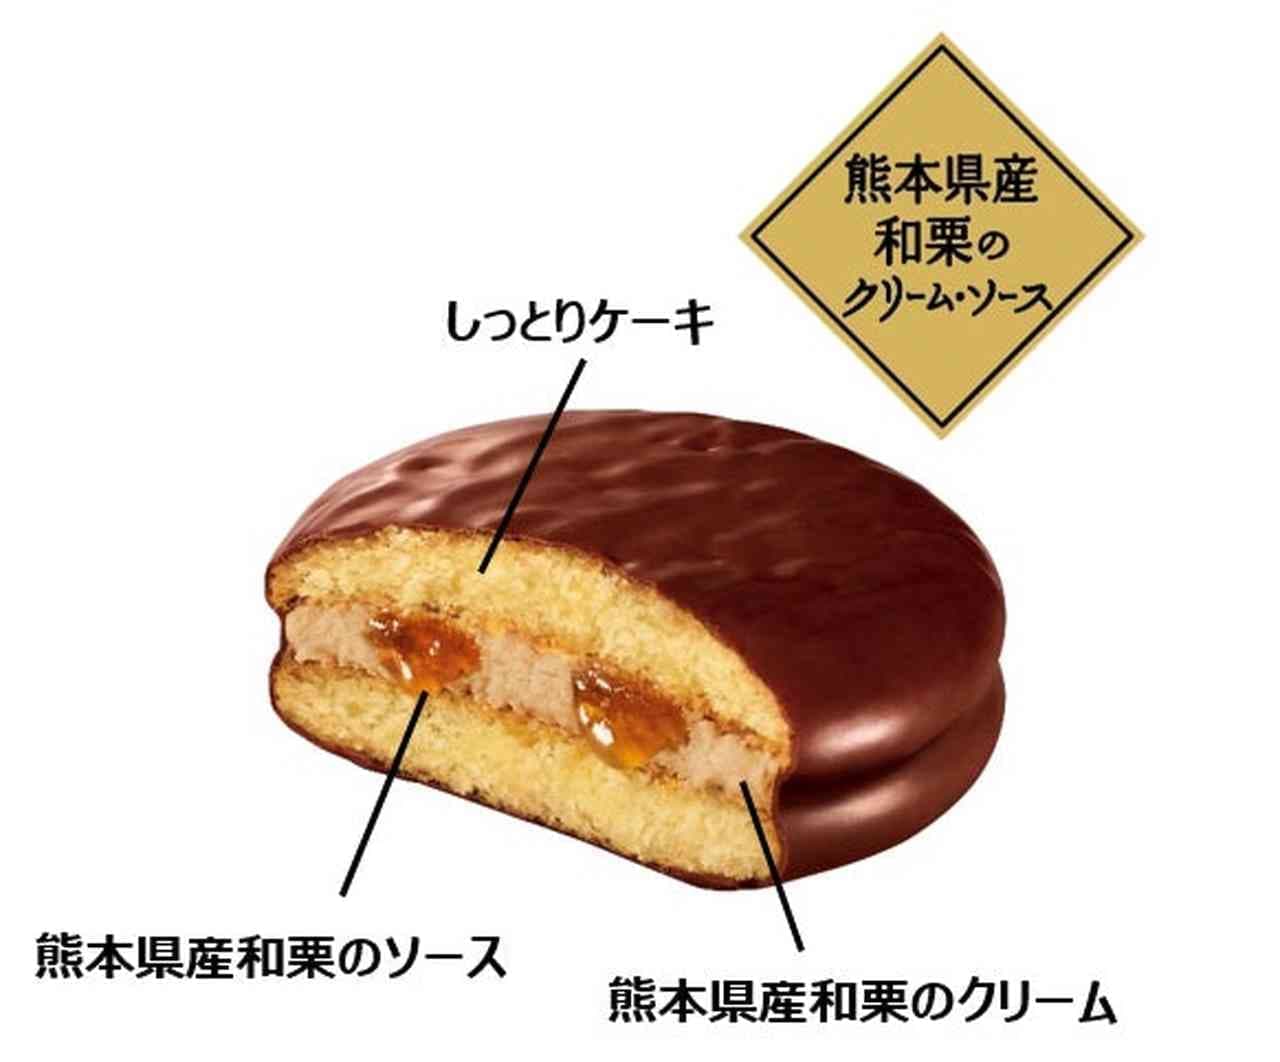 Choco Pie [Selected Japanese chestnuts